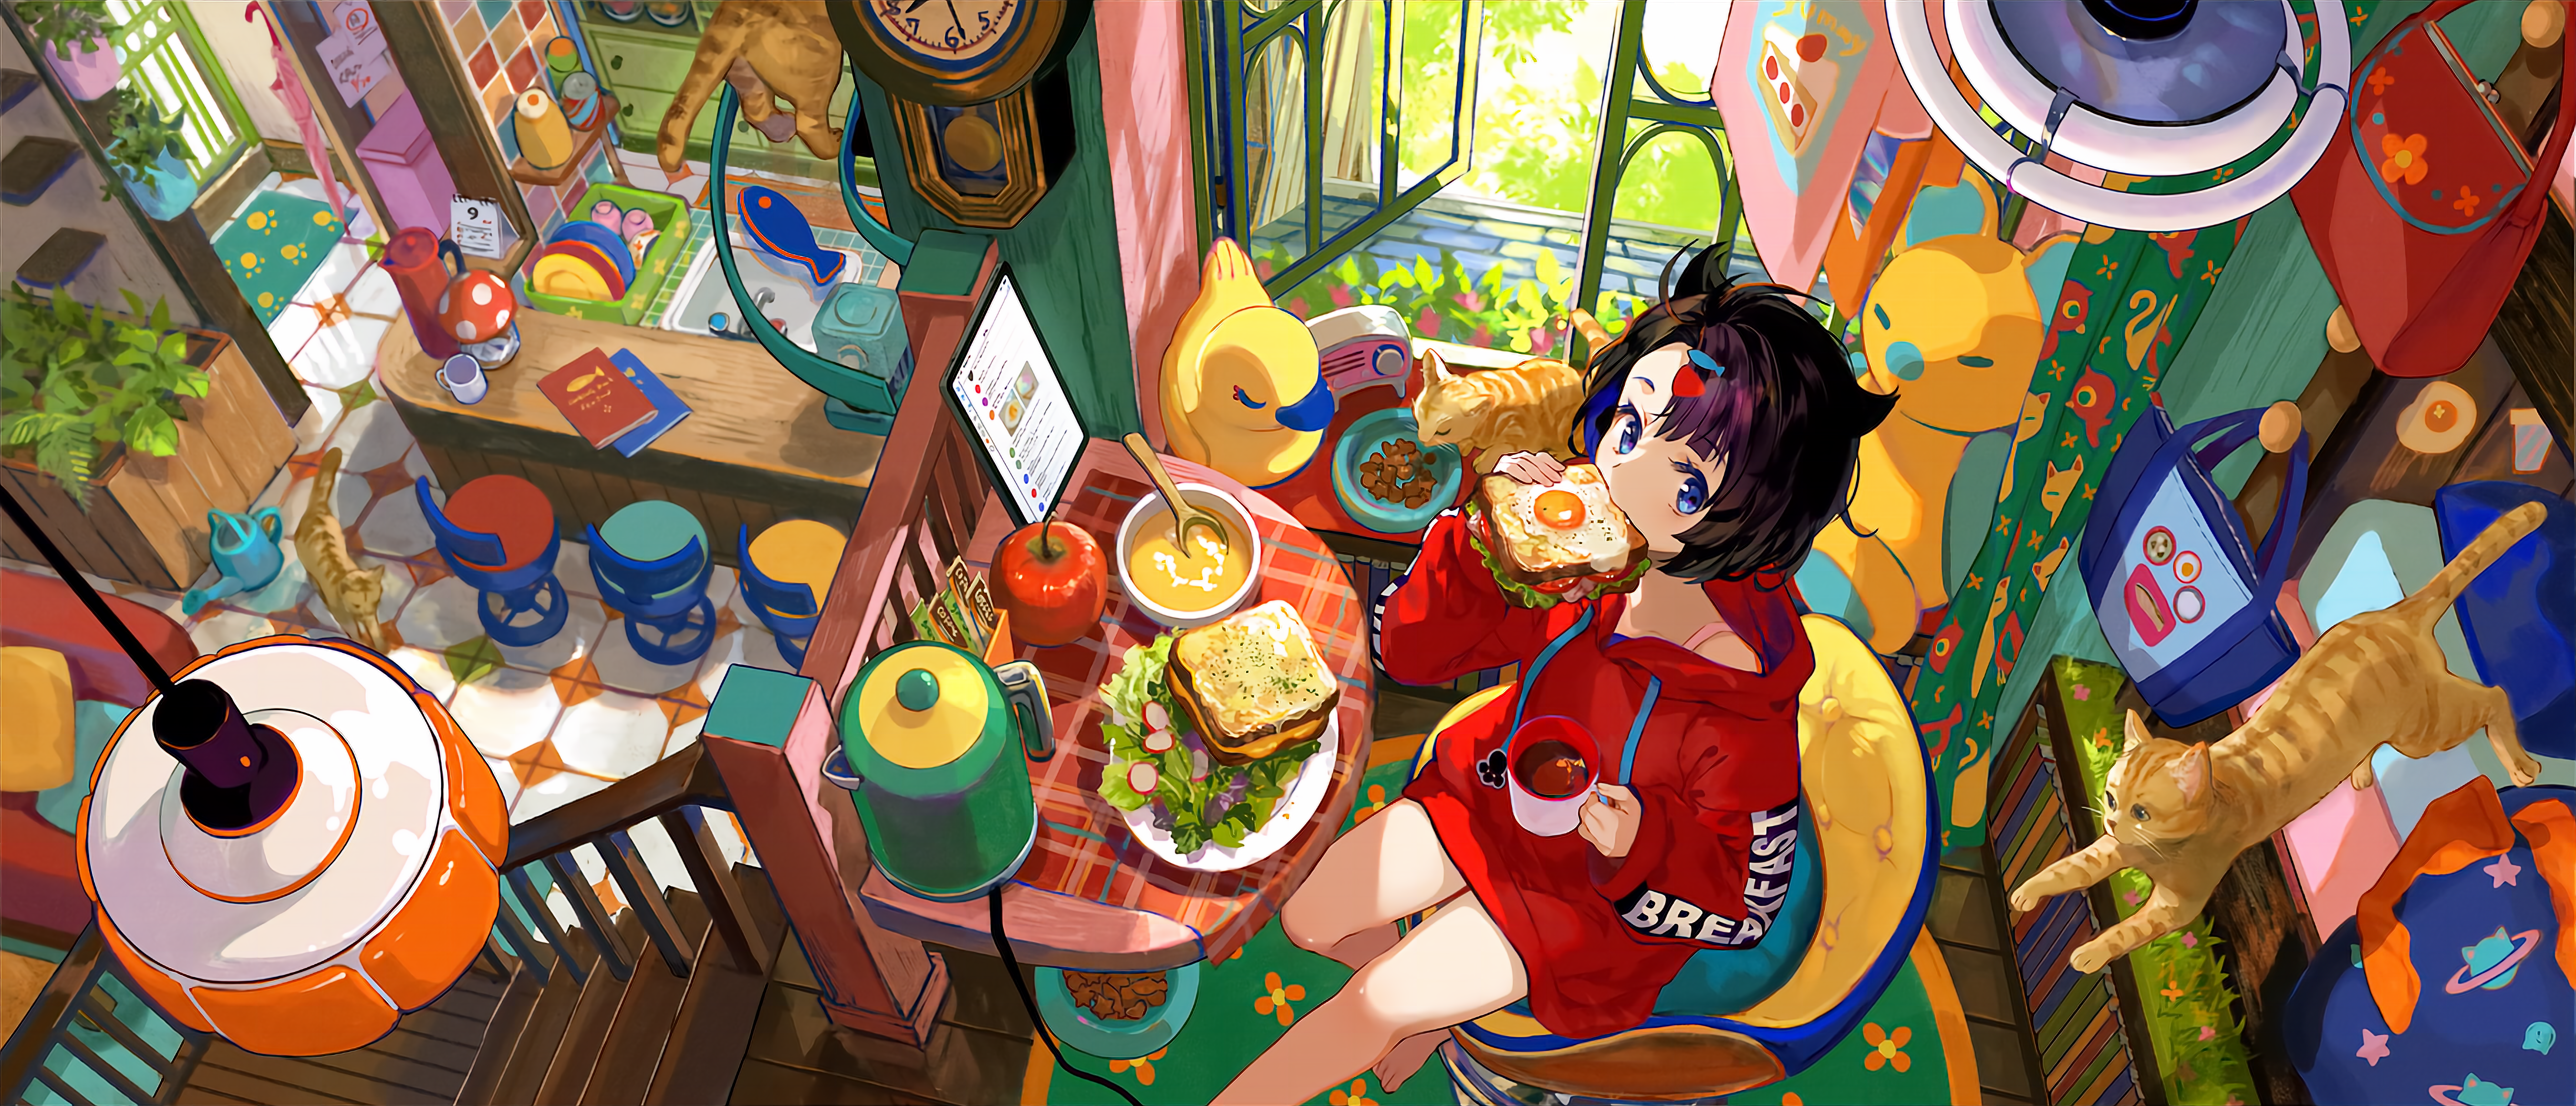 Anime 5400x2319 anime anime girls artwork aerial view Fuji Choko black hair women indoors blue eyes sitting looking at viewer anime girls eating cats animals drink food toasts fruit apples plates kitchen steps chair interior lock numbers hair clip long sleeves short hair hoods scenery stairs rubber ducks faucets sink eggs bag wide screen sandwiches bowls